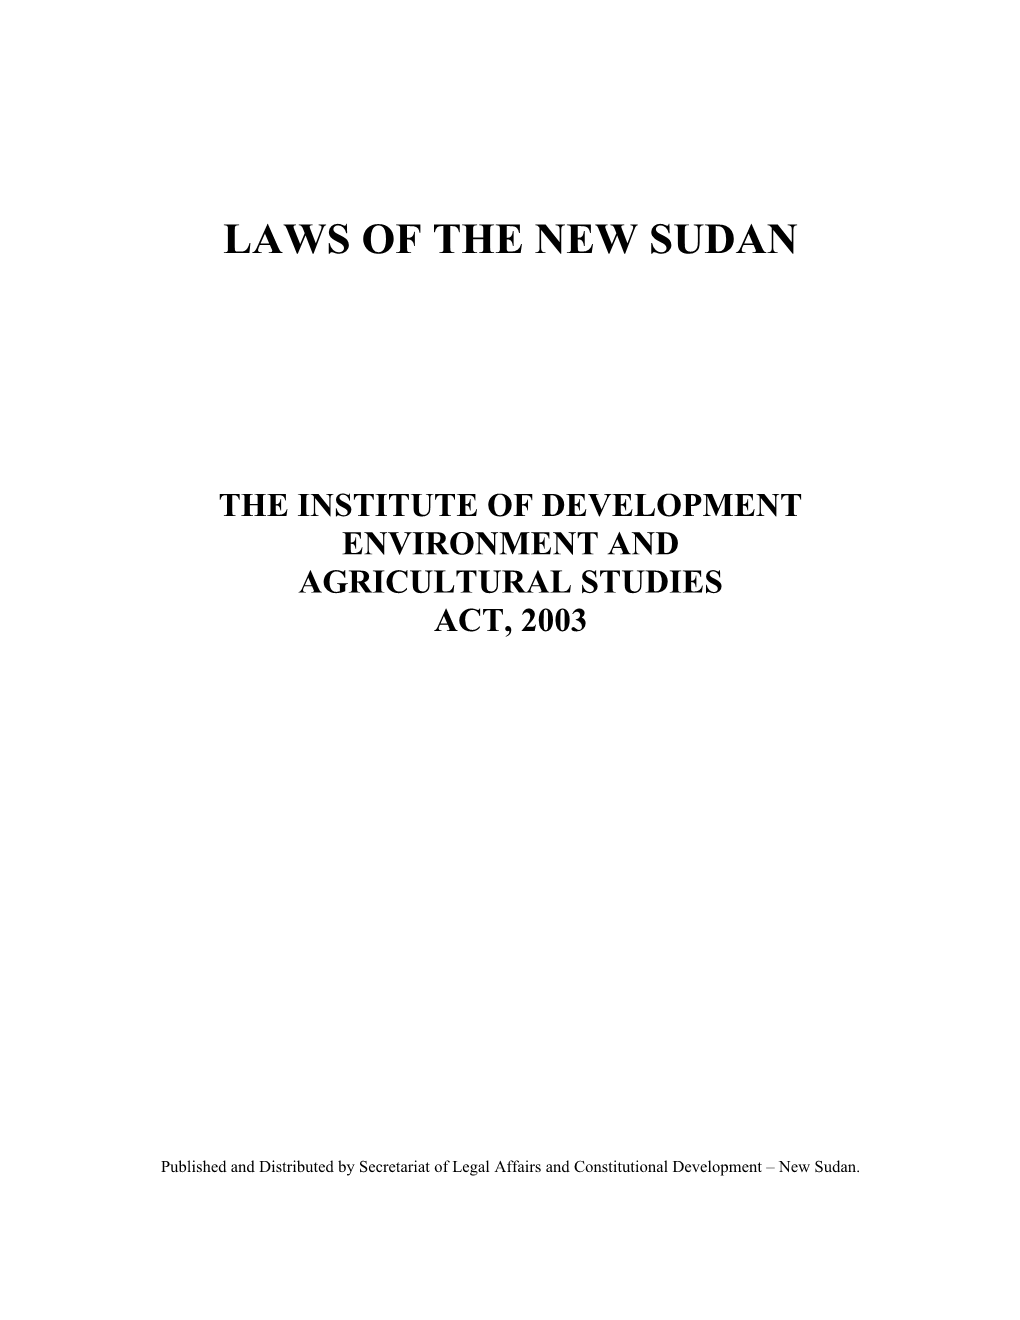 Laws of the New Sudan